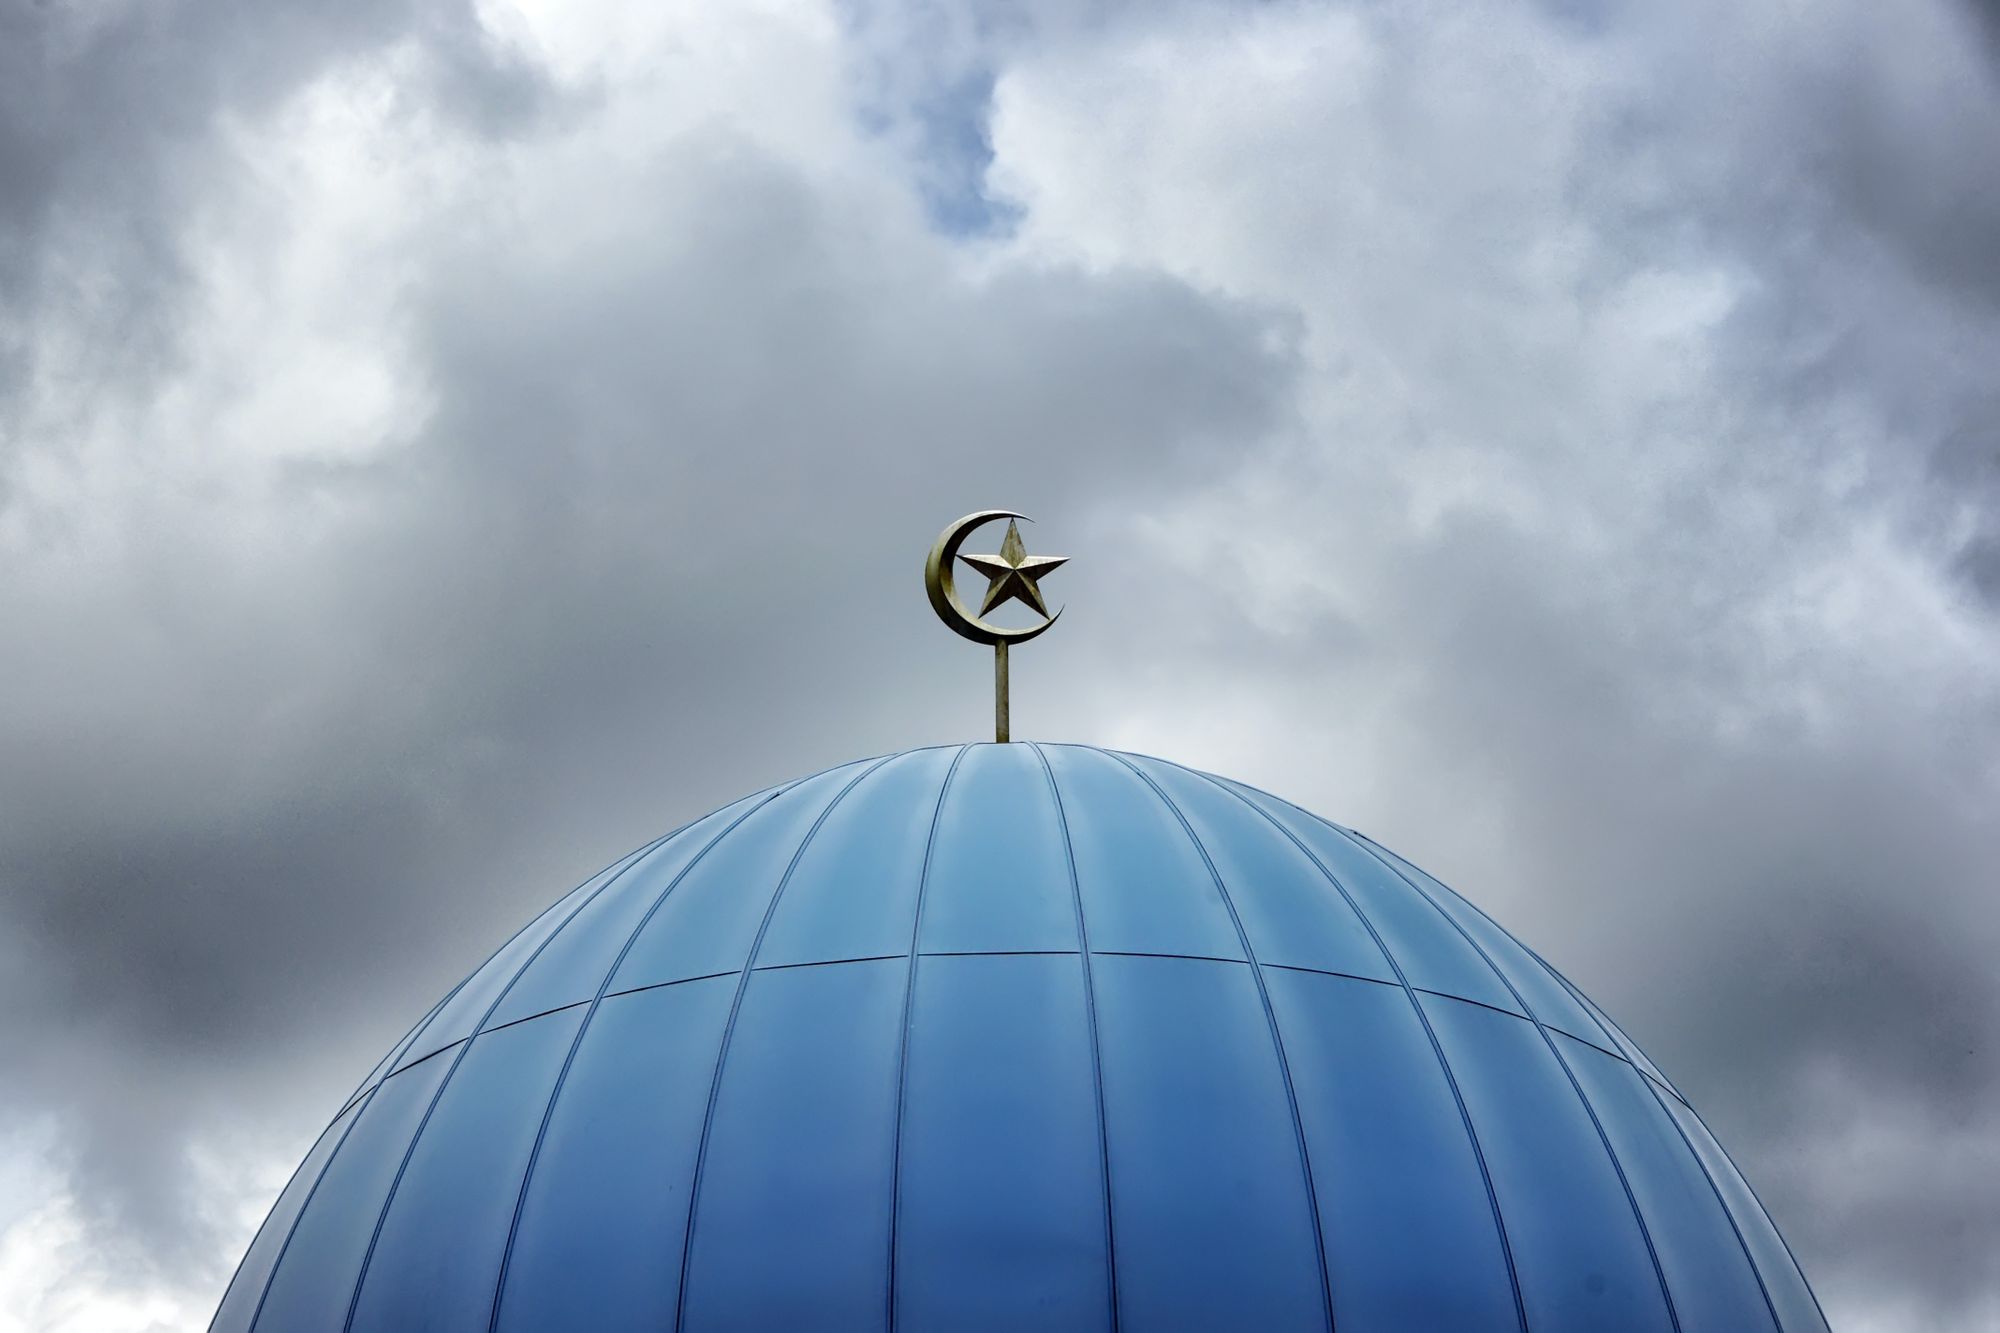 Mosque dome with Islamic symbol of start and crescent moon